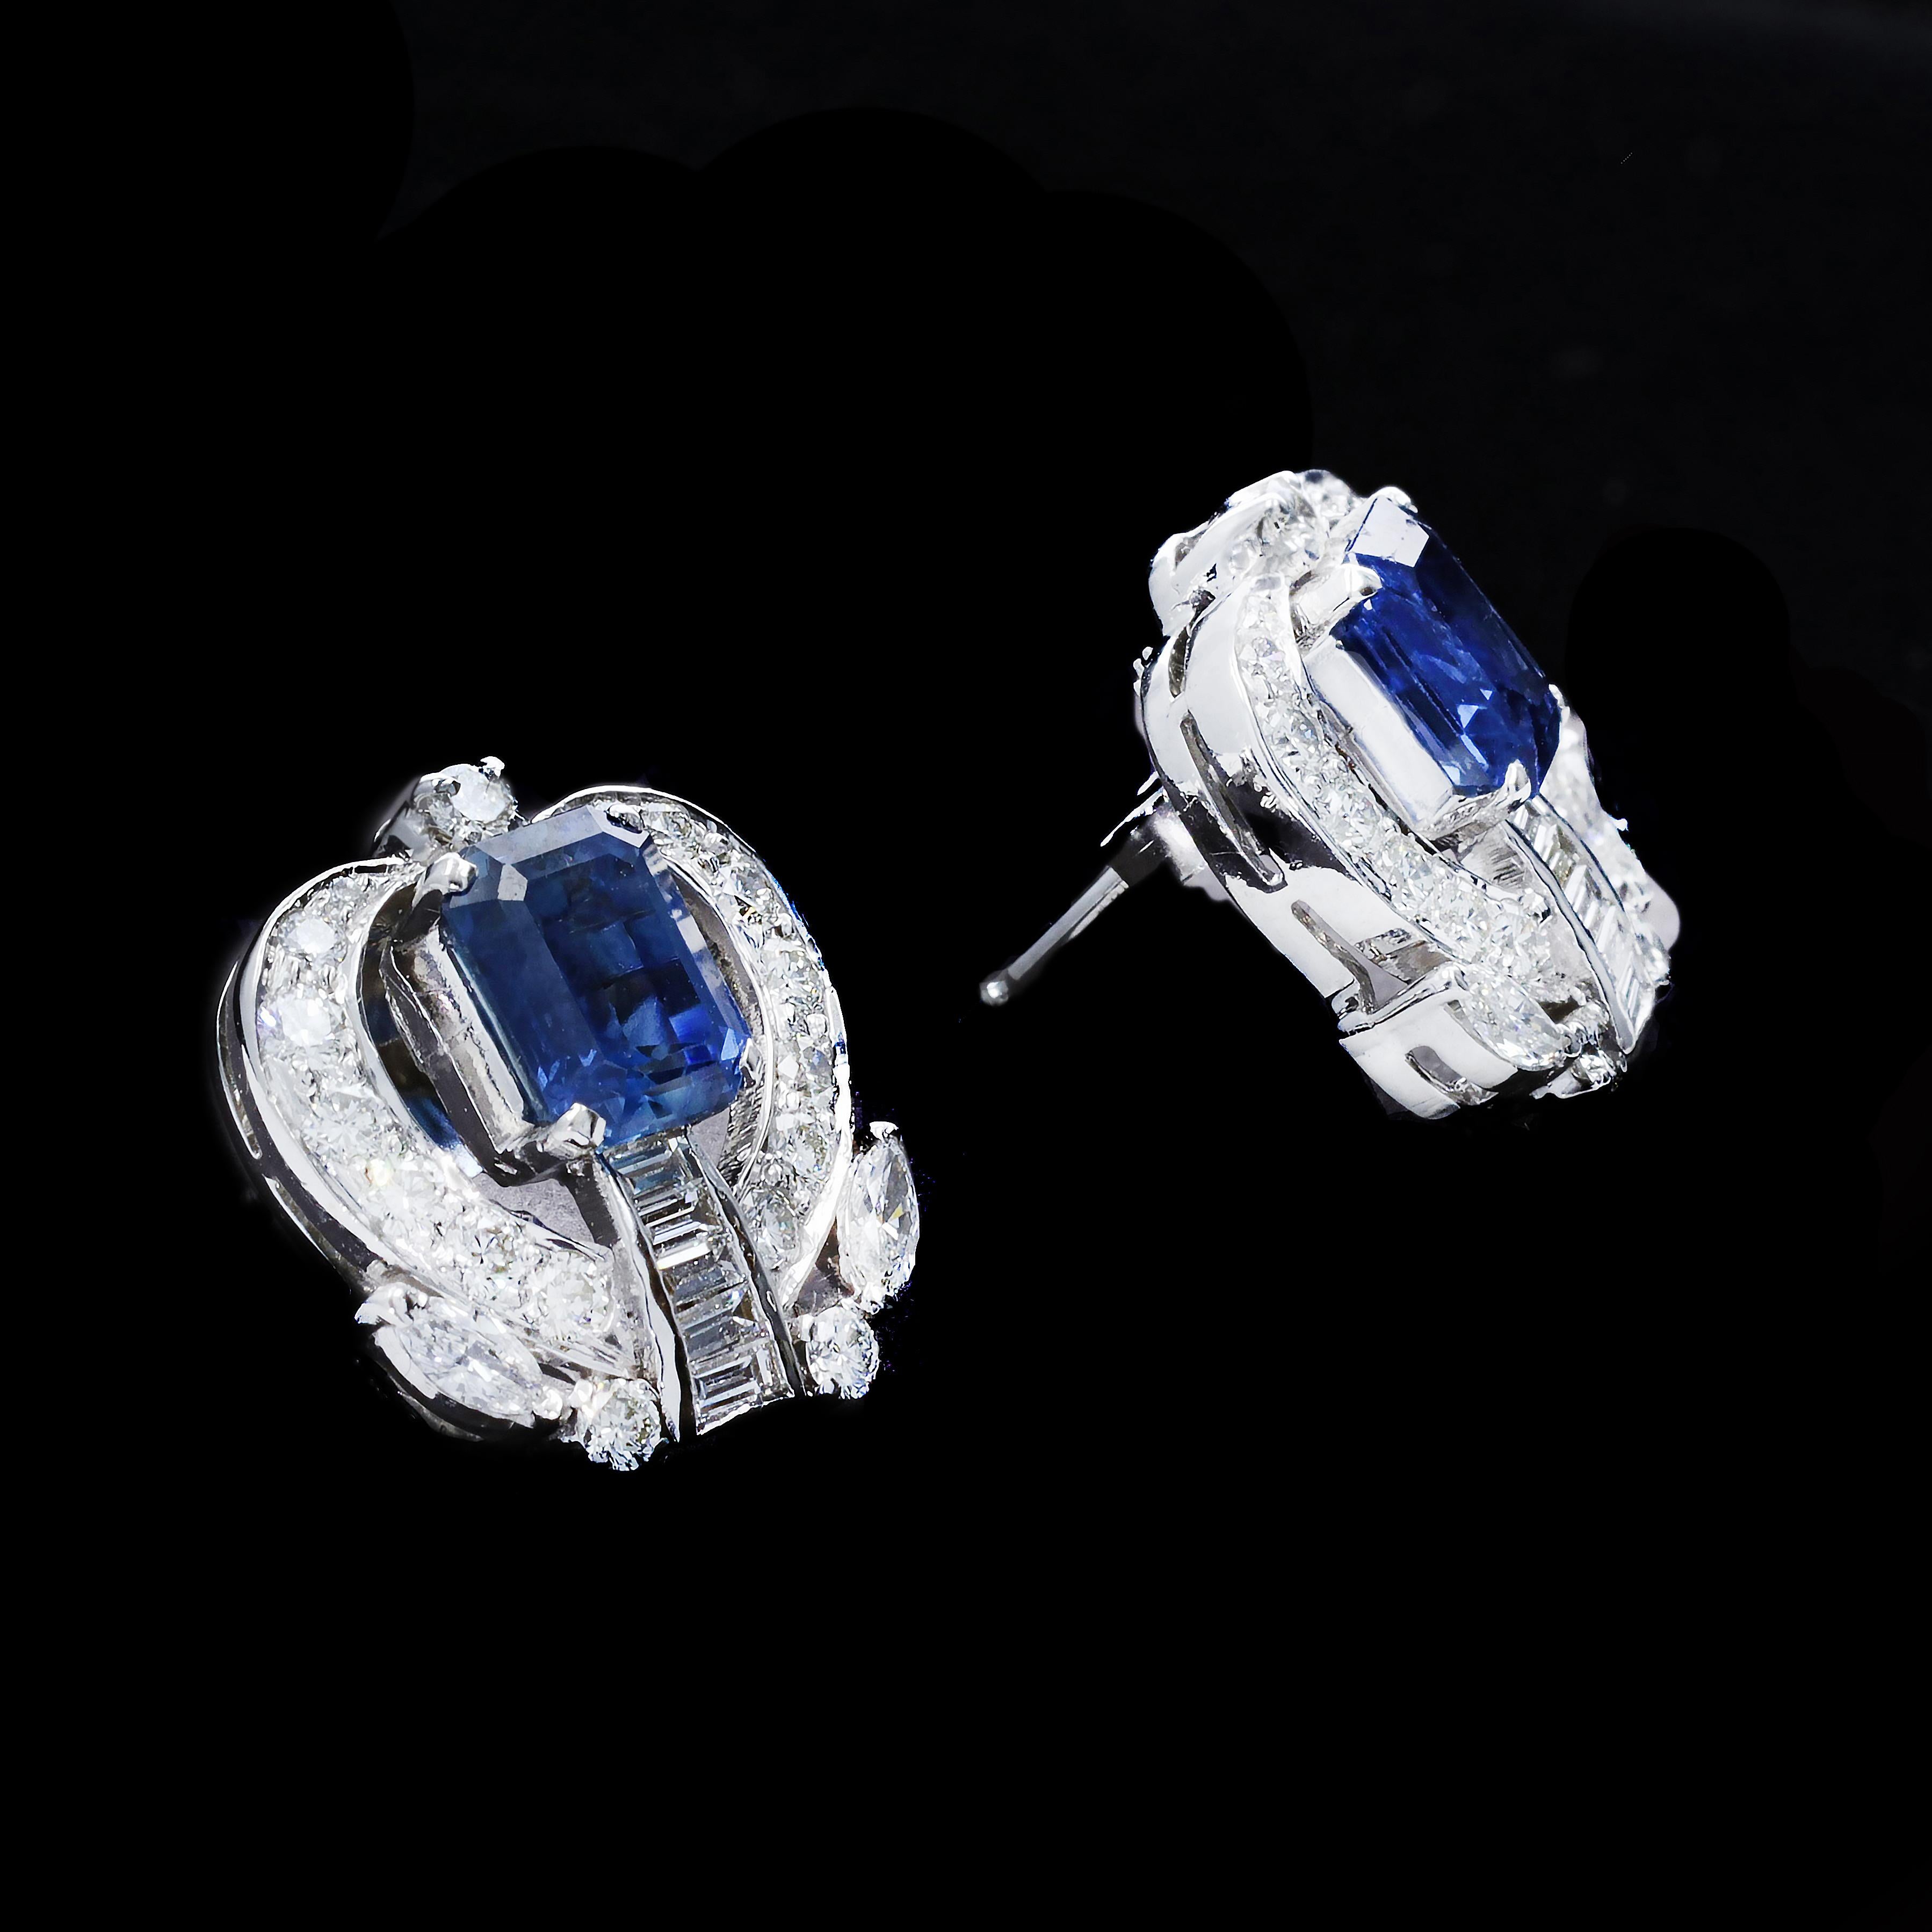 This exceptional set of sapphire and diamond earrings is the perfect pairing of romance and luxury. The earrings feature sparkling round, baguette and marquise cut diamonds that weigh approximately 1.50ct. The color of these diamonds is H with VS